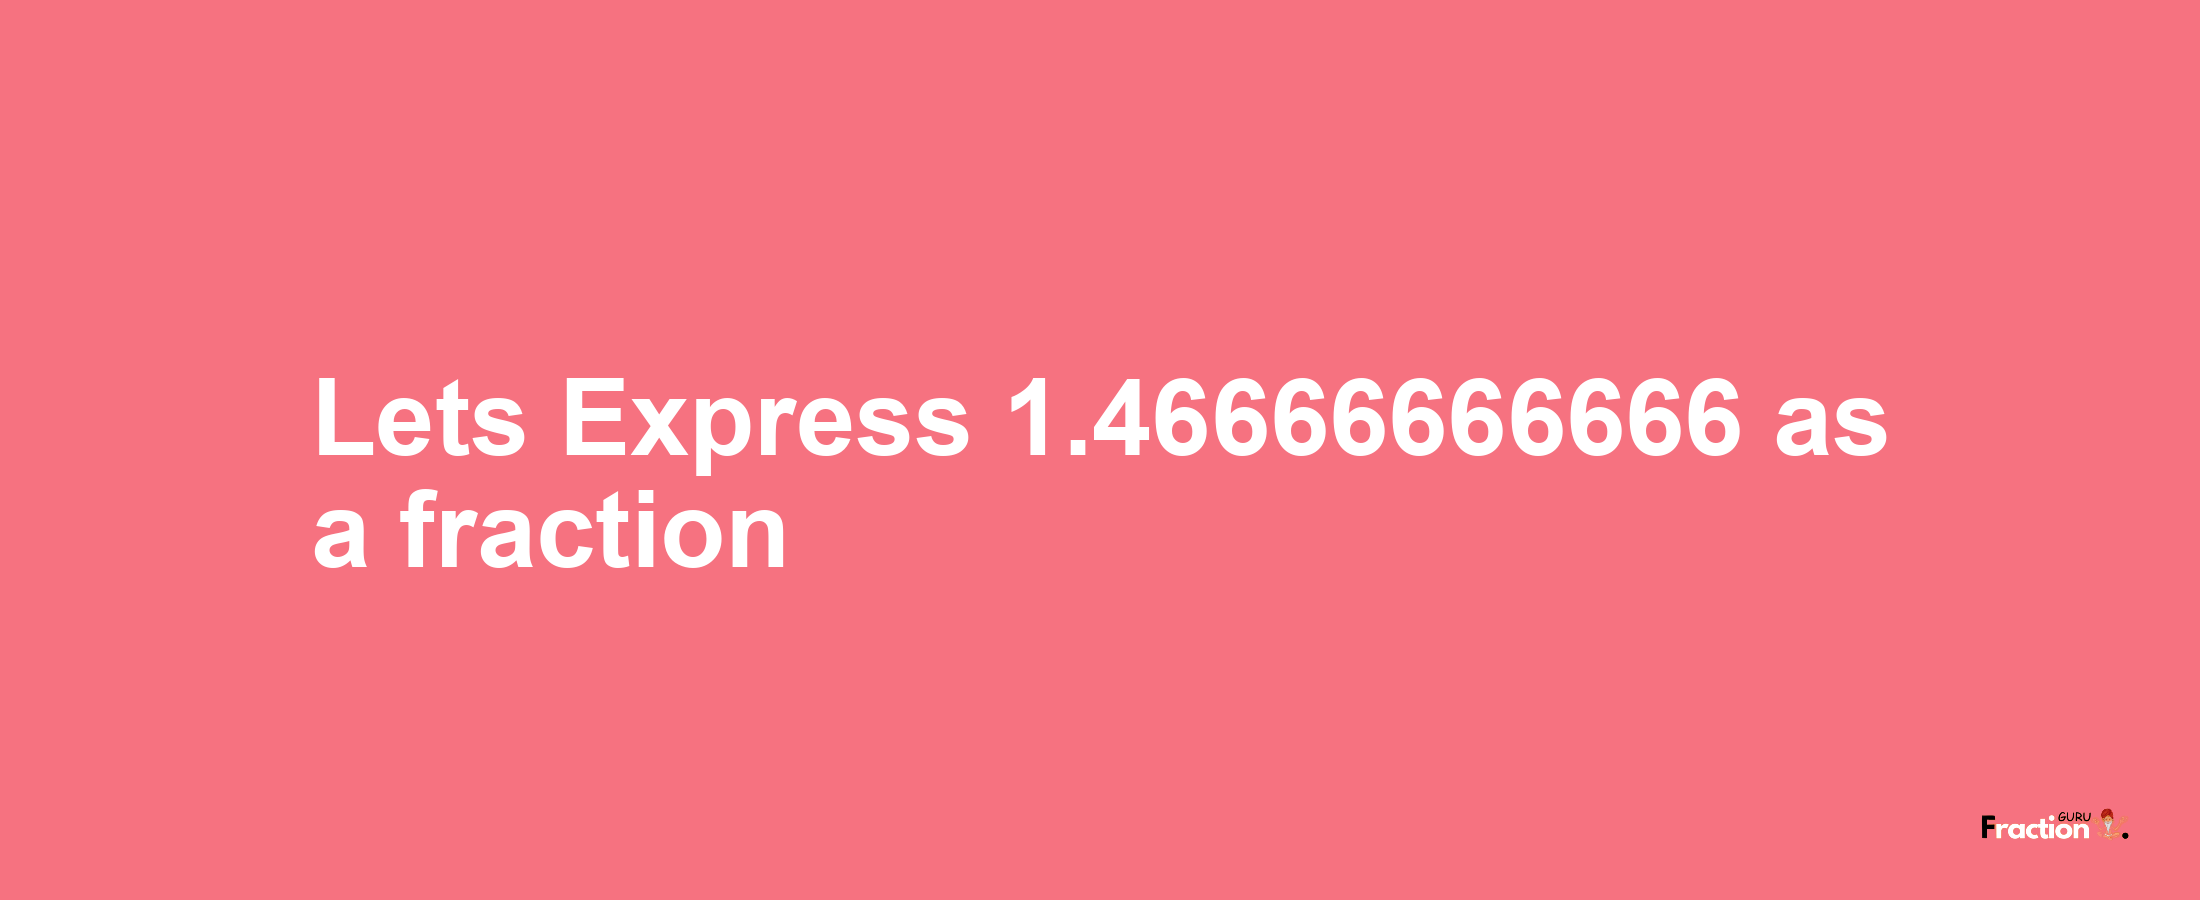 Lets Express 1.46666666666 as afraction